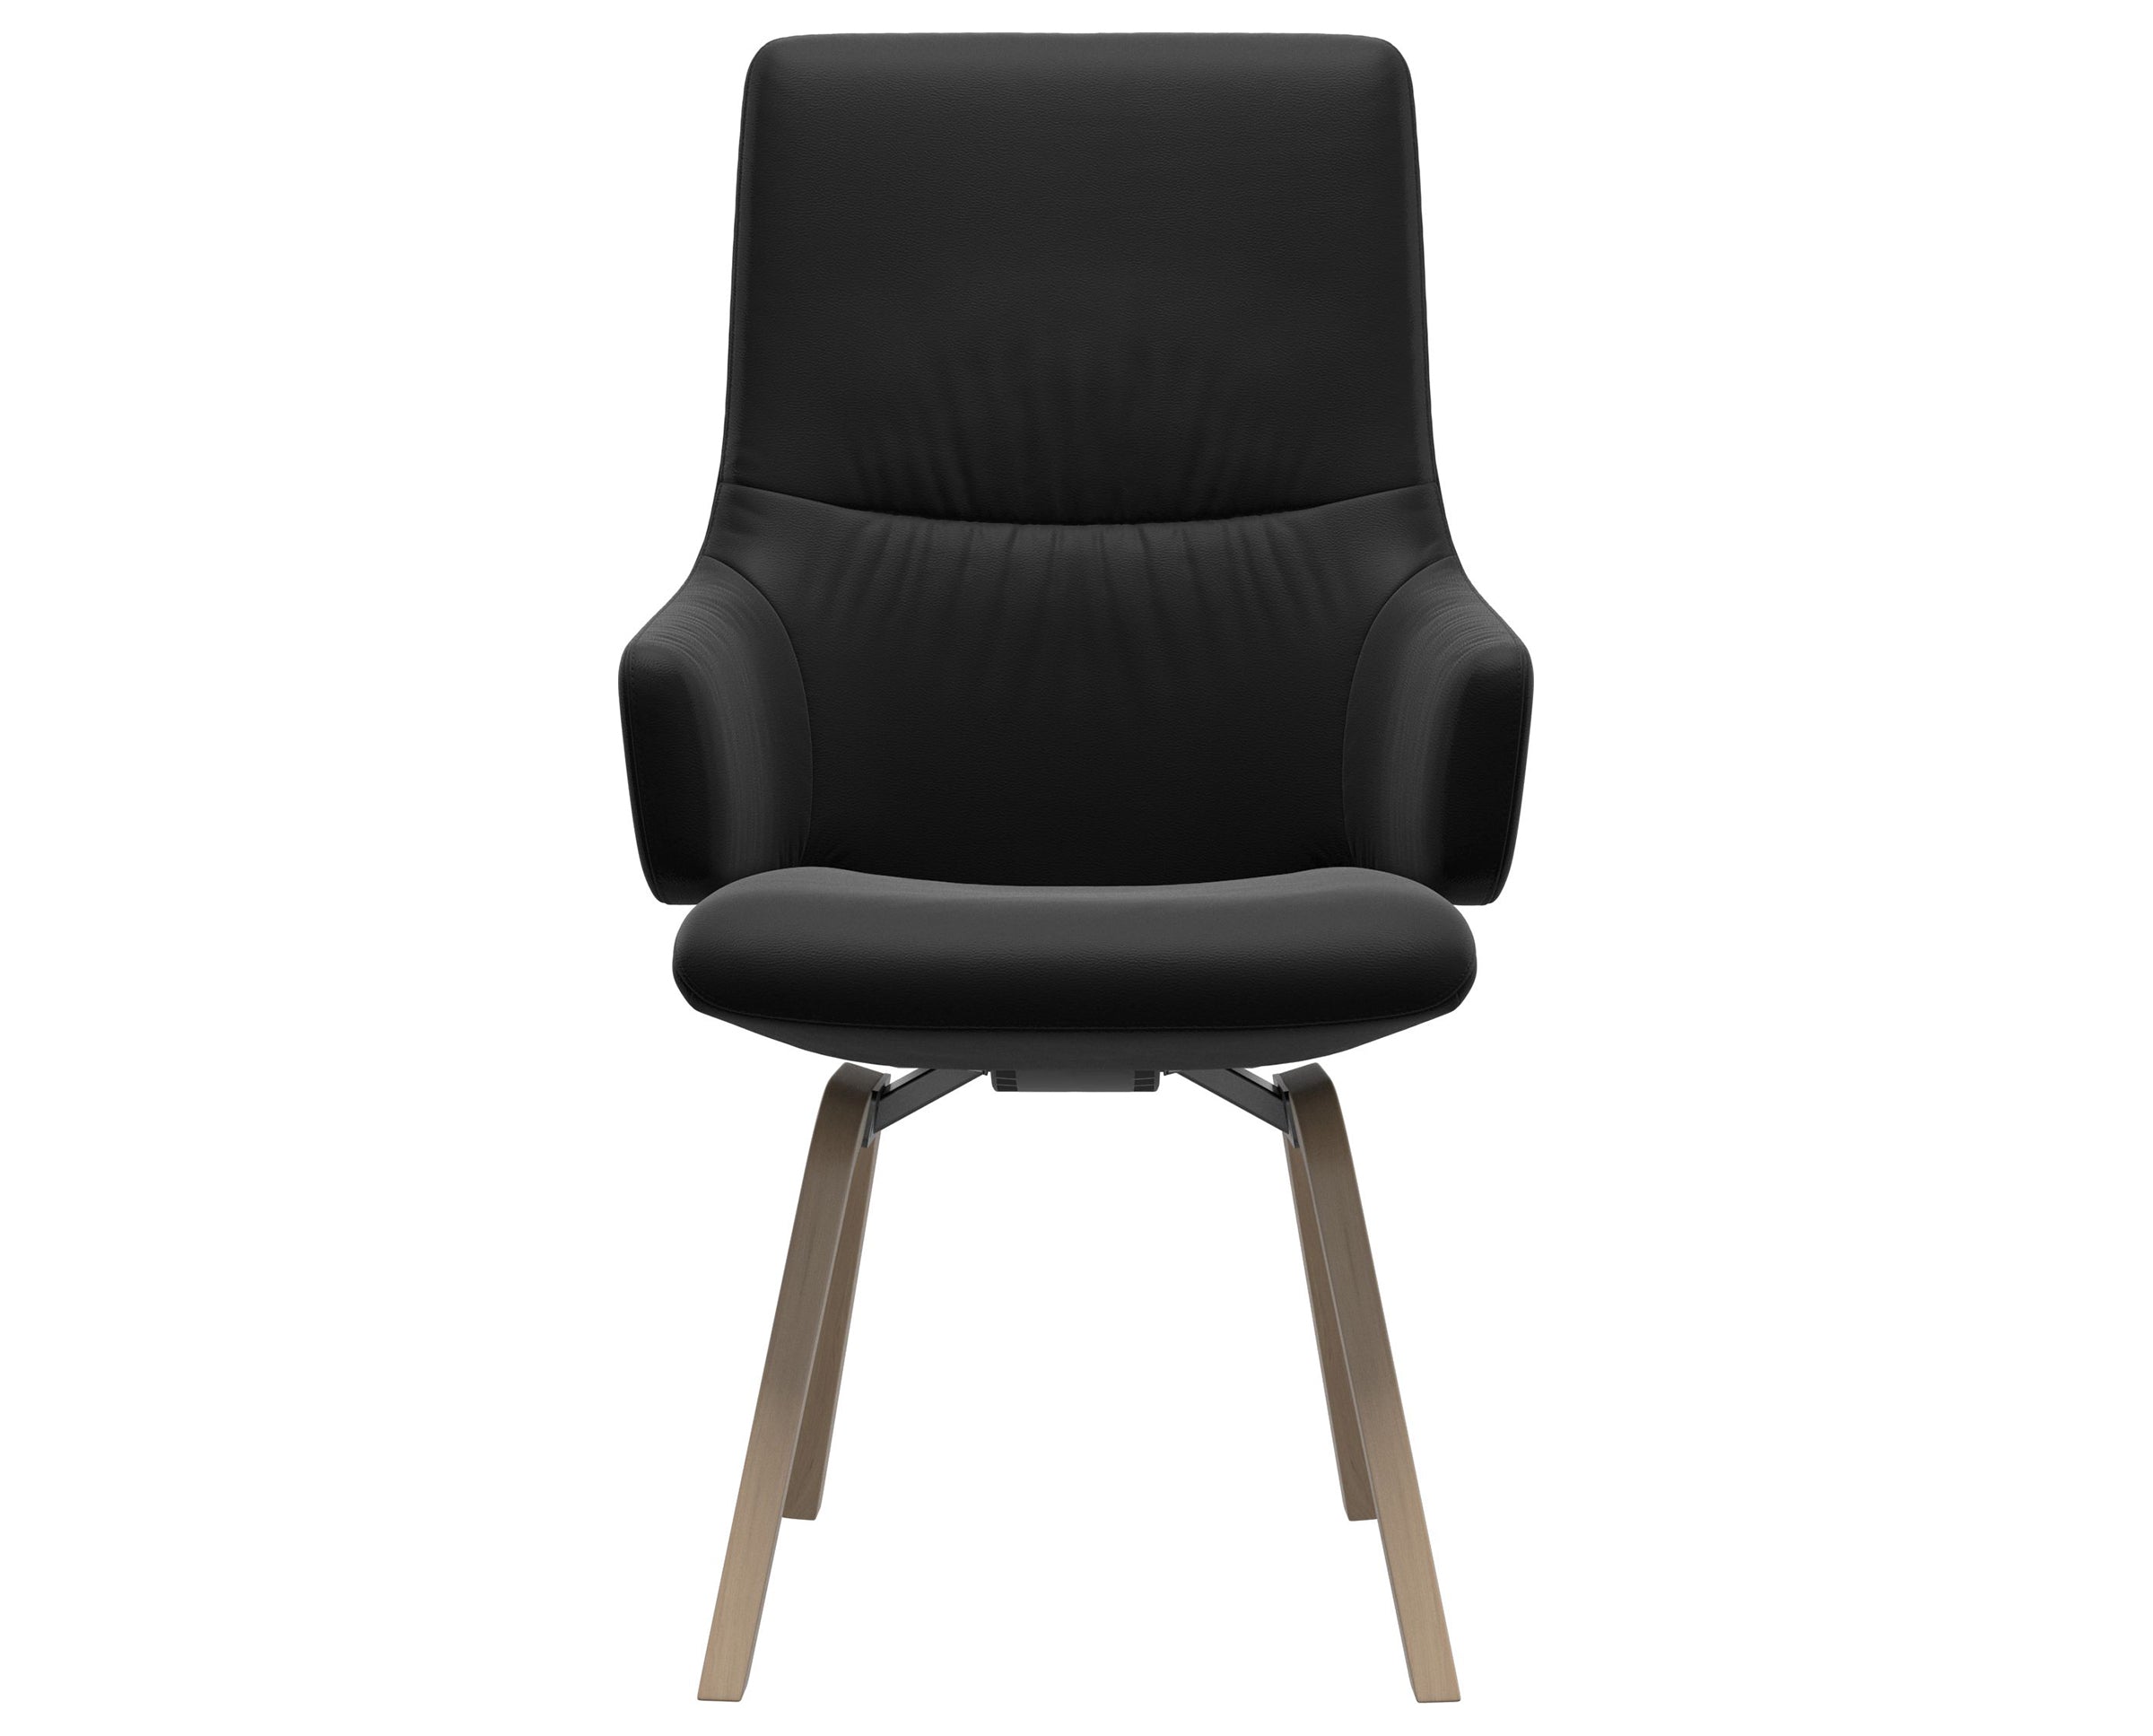 Paloma Leather Black and Natural Base | Stressless Mint High Back D200 Dining Chair w/Arms | Valley Ridge Furniture